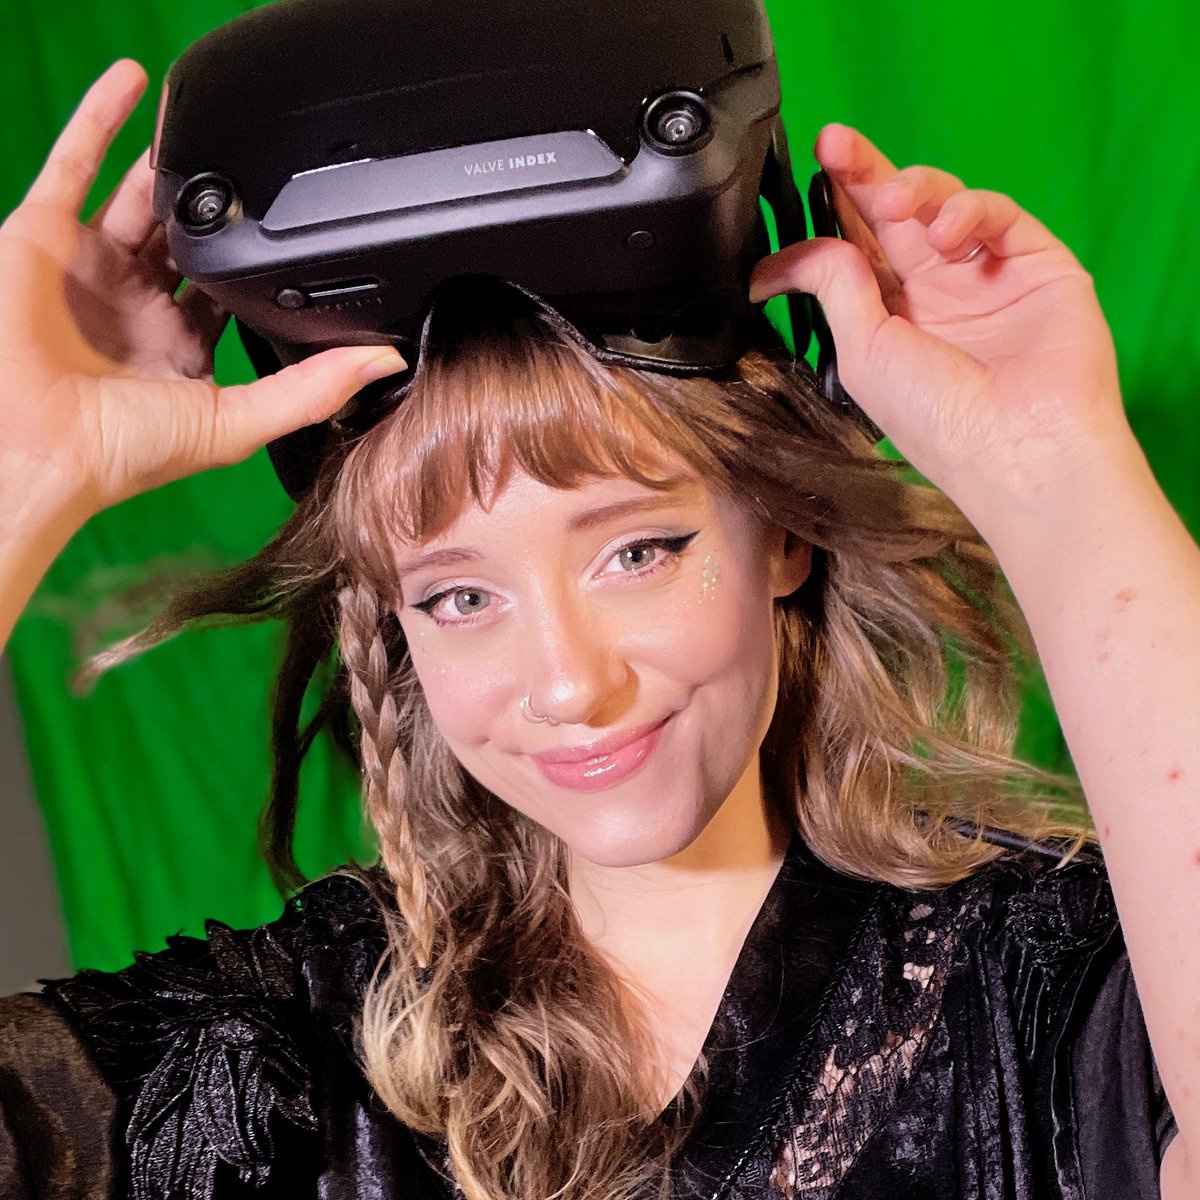 Firstly we're really happy to announce that we have a new festival host joining us this year, Rosie Summers (@VR_Rosie) will be hosting this years Game Talks and bringing their years of experience as both a 3D animator and award-winning Virtual Reality performance artist.